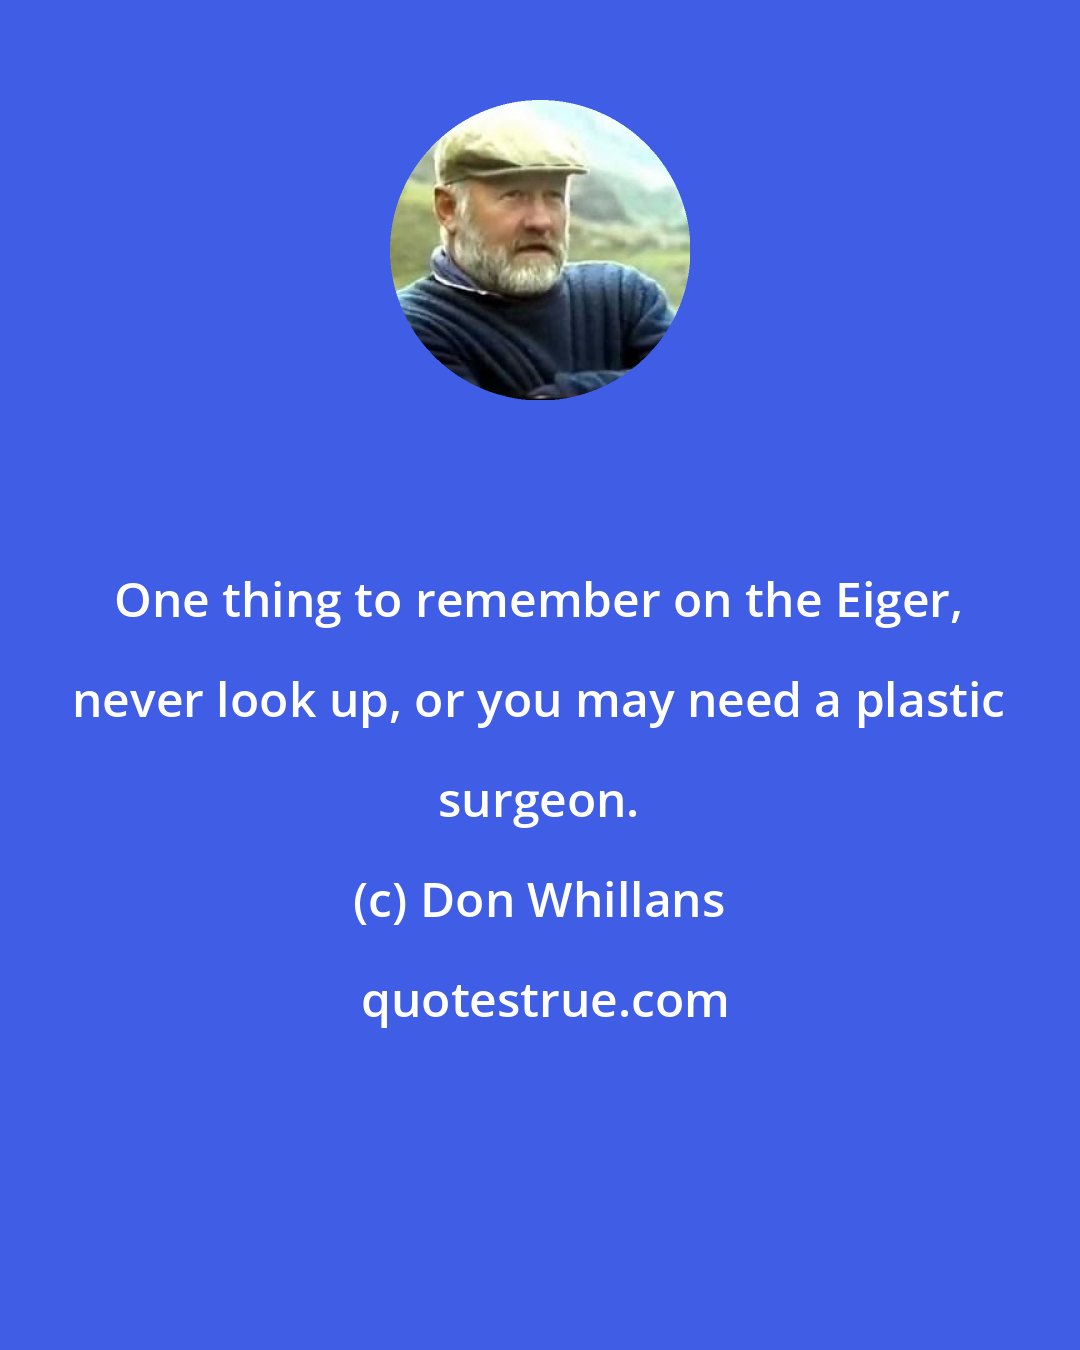 Don Whillans: One thing to remember on the Eiger, never look up, or you may need a plastic surgeon.